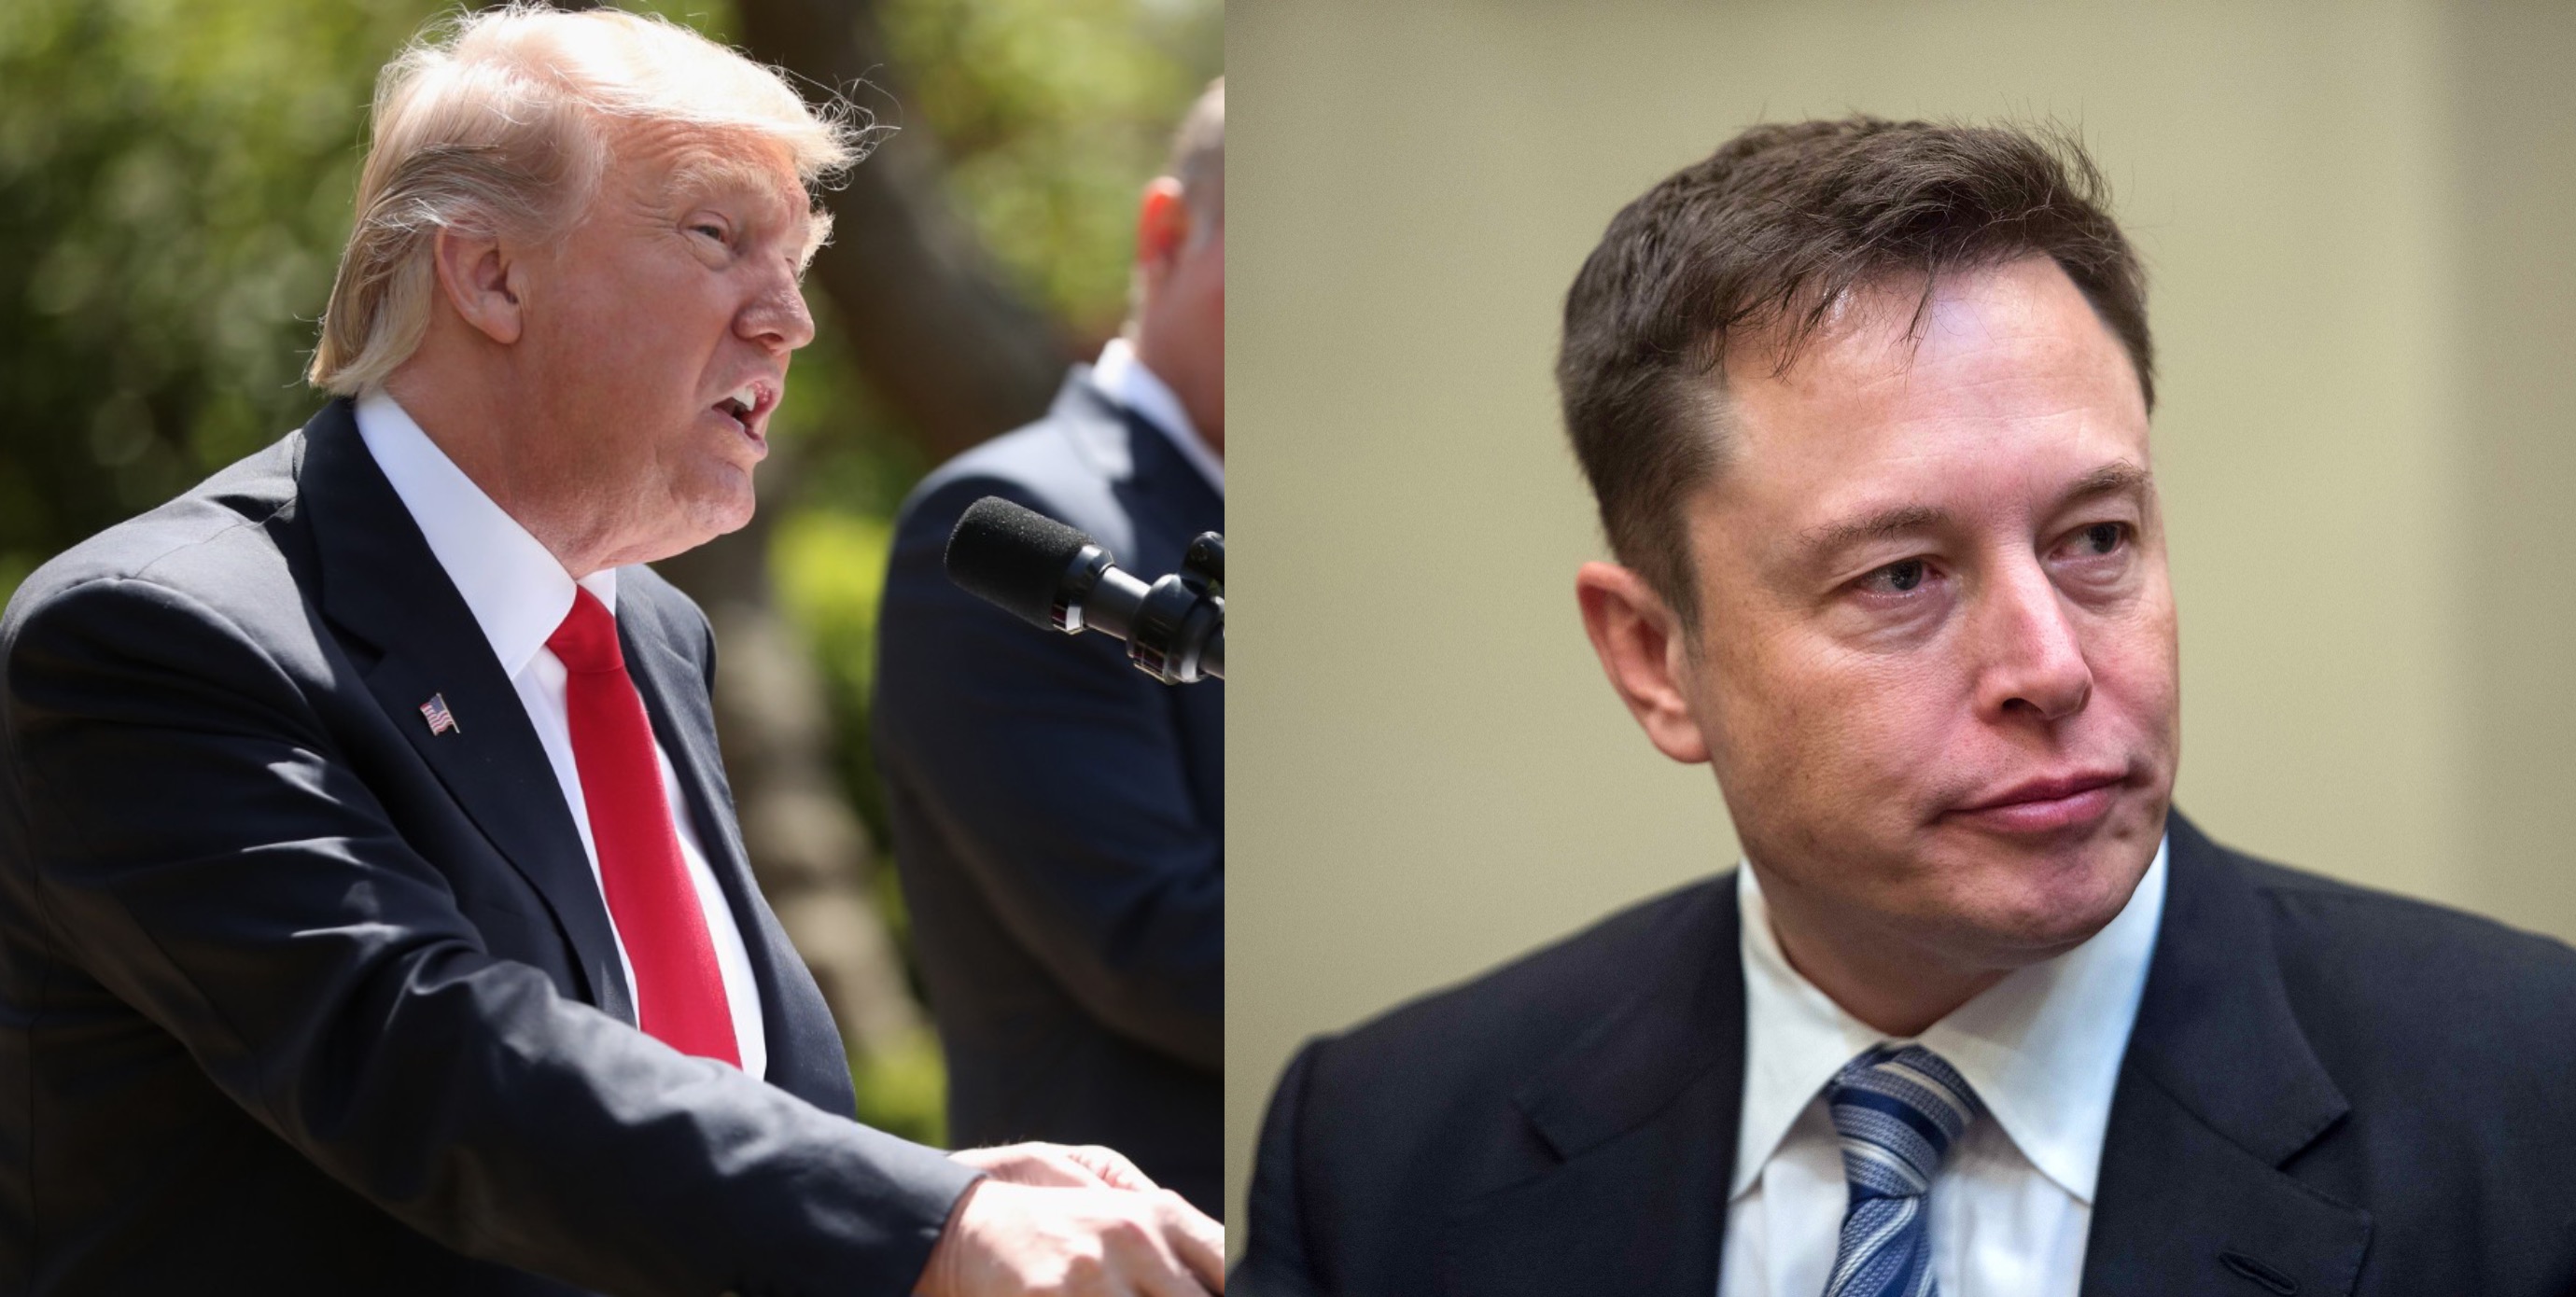 Trump Commends Tesla and Elon Musk